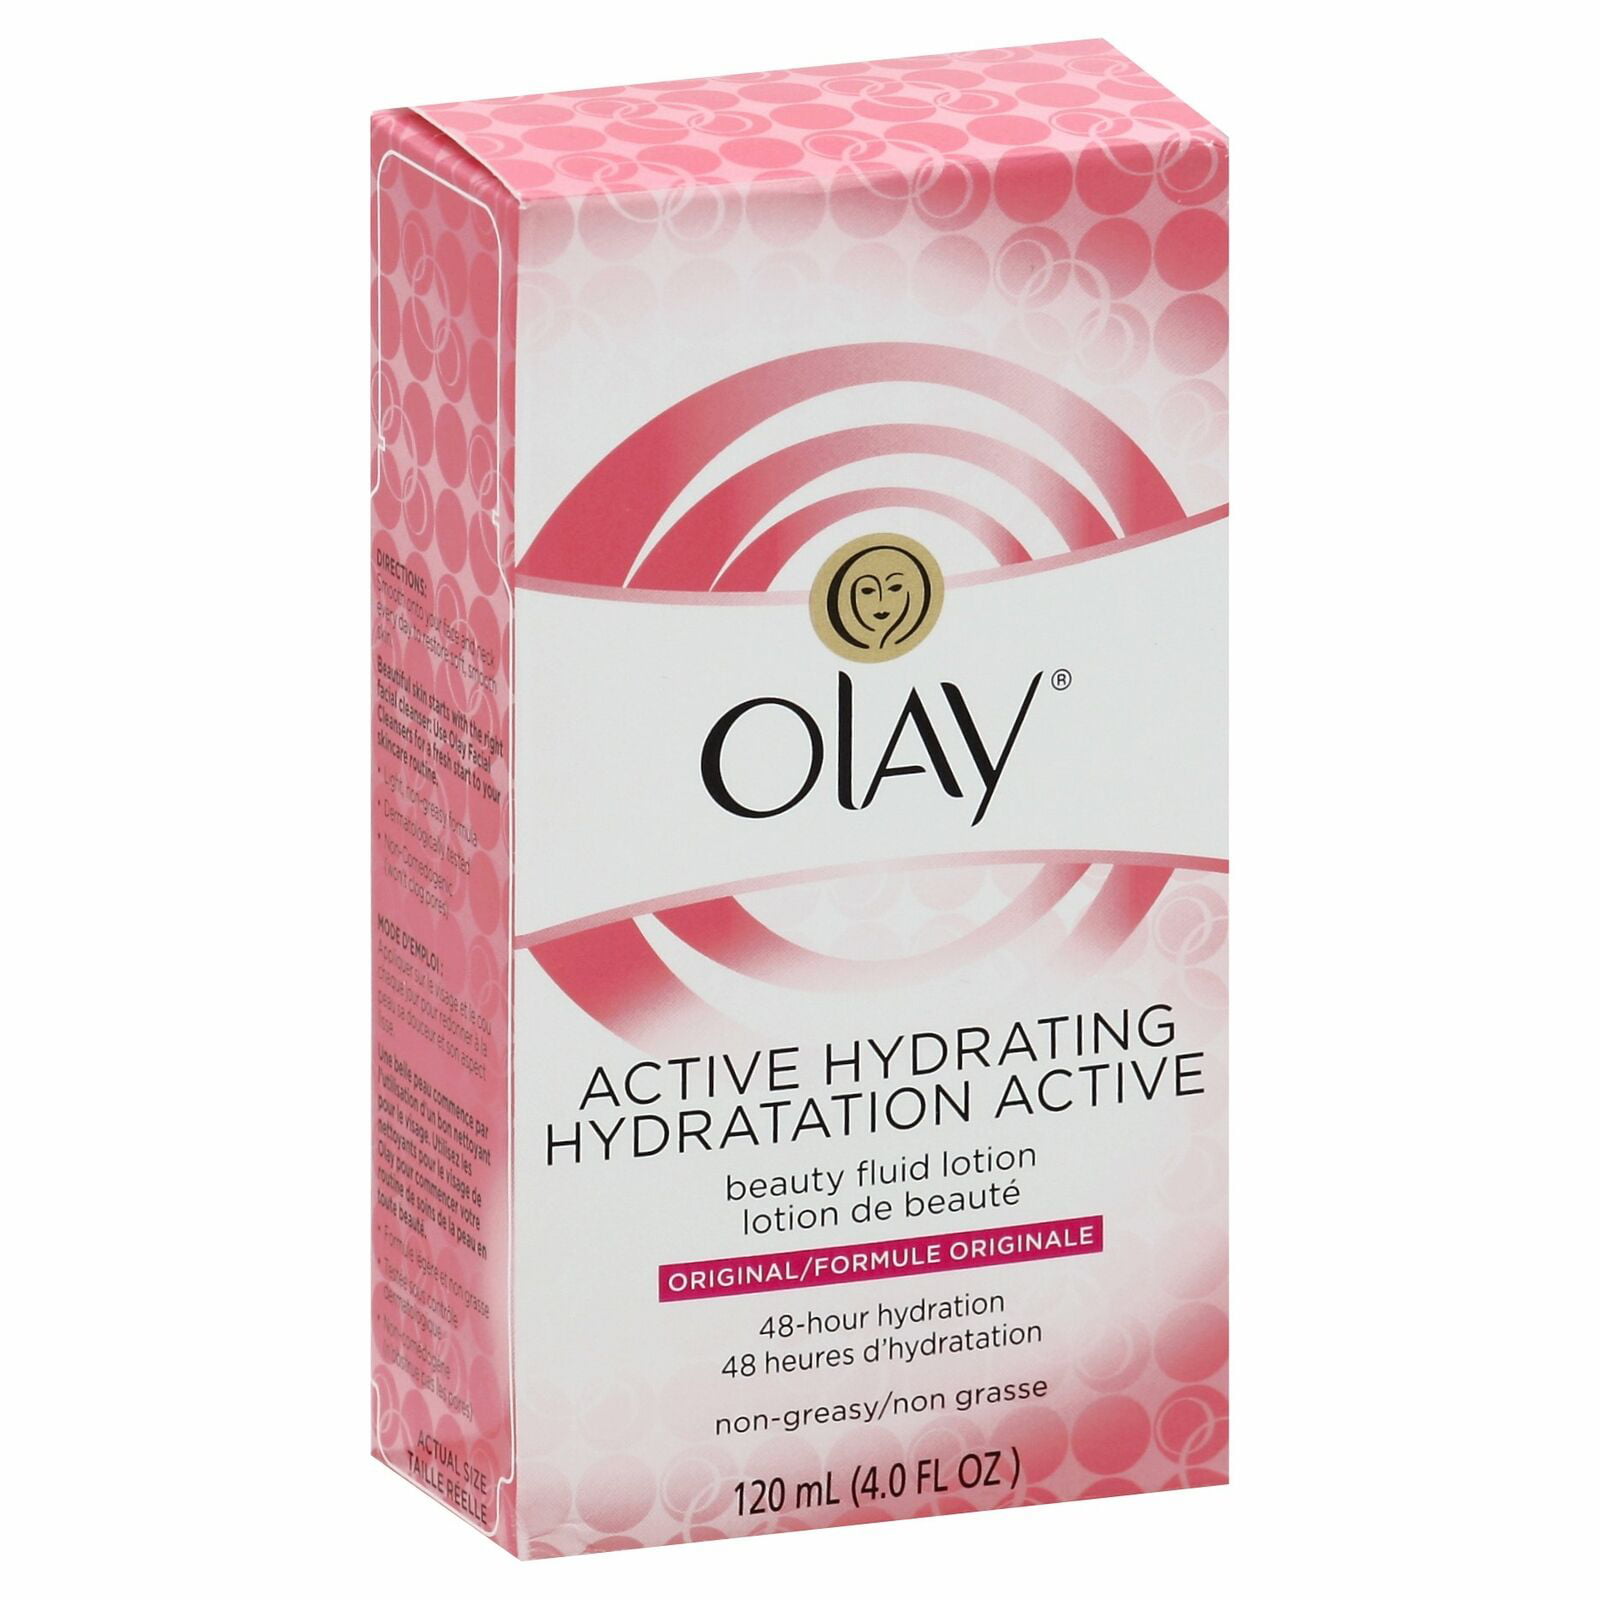 Oil Of Olay 4Z,Size 4Z,Pack of 3, Olay Original Active Hydrating Beauty